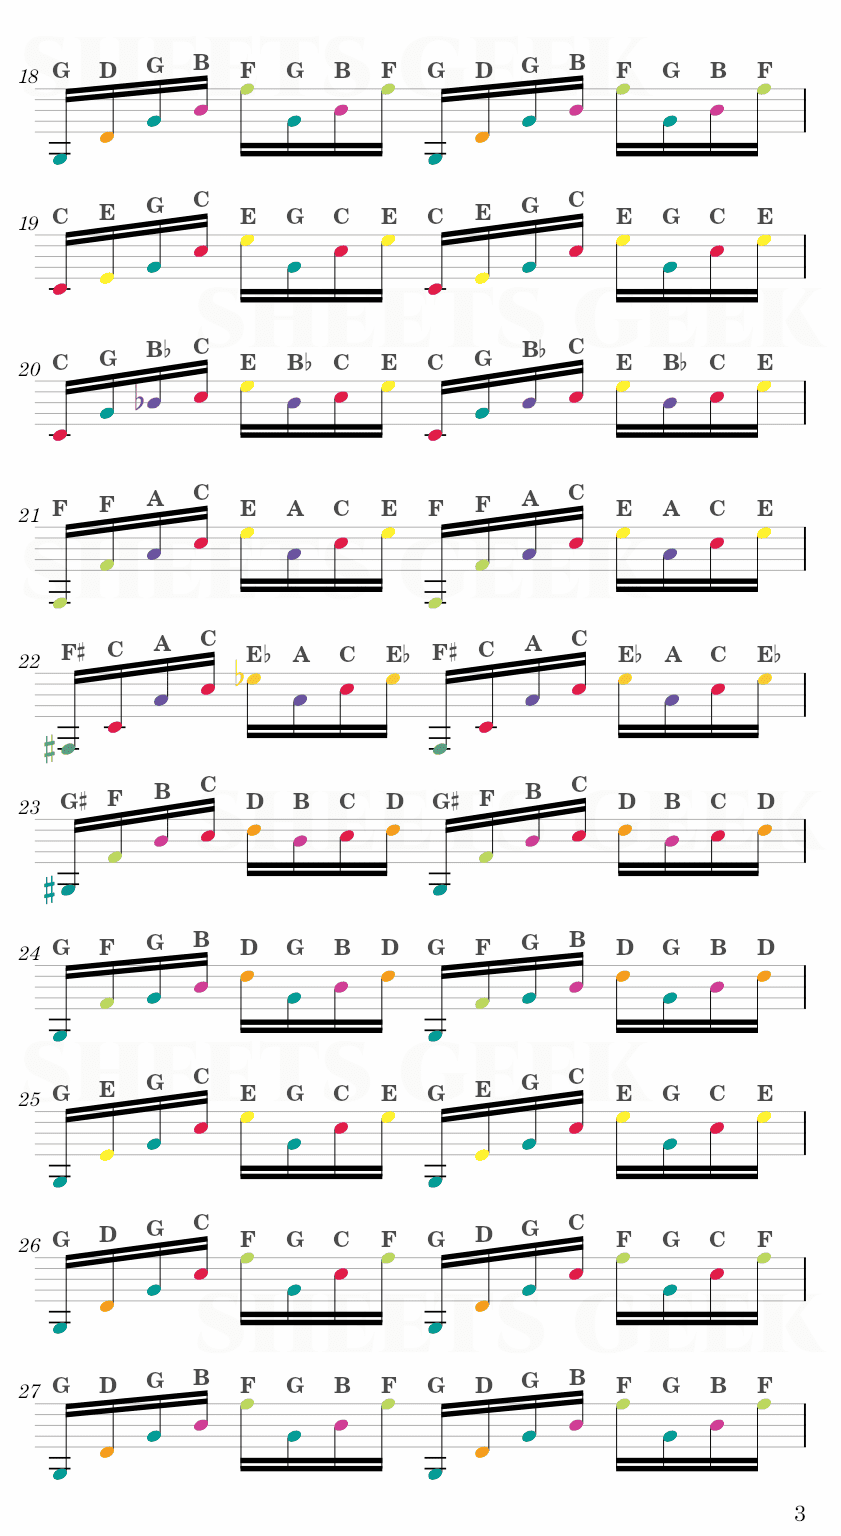 Prelude And Fugue In C Major - Bach Easy Sheet Music Free for piano, keyboard, flute, violin, sax, cello page 3